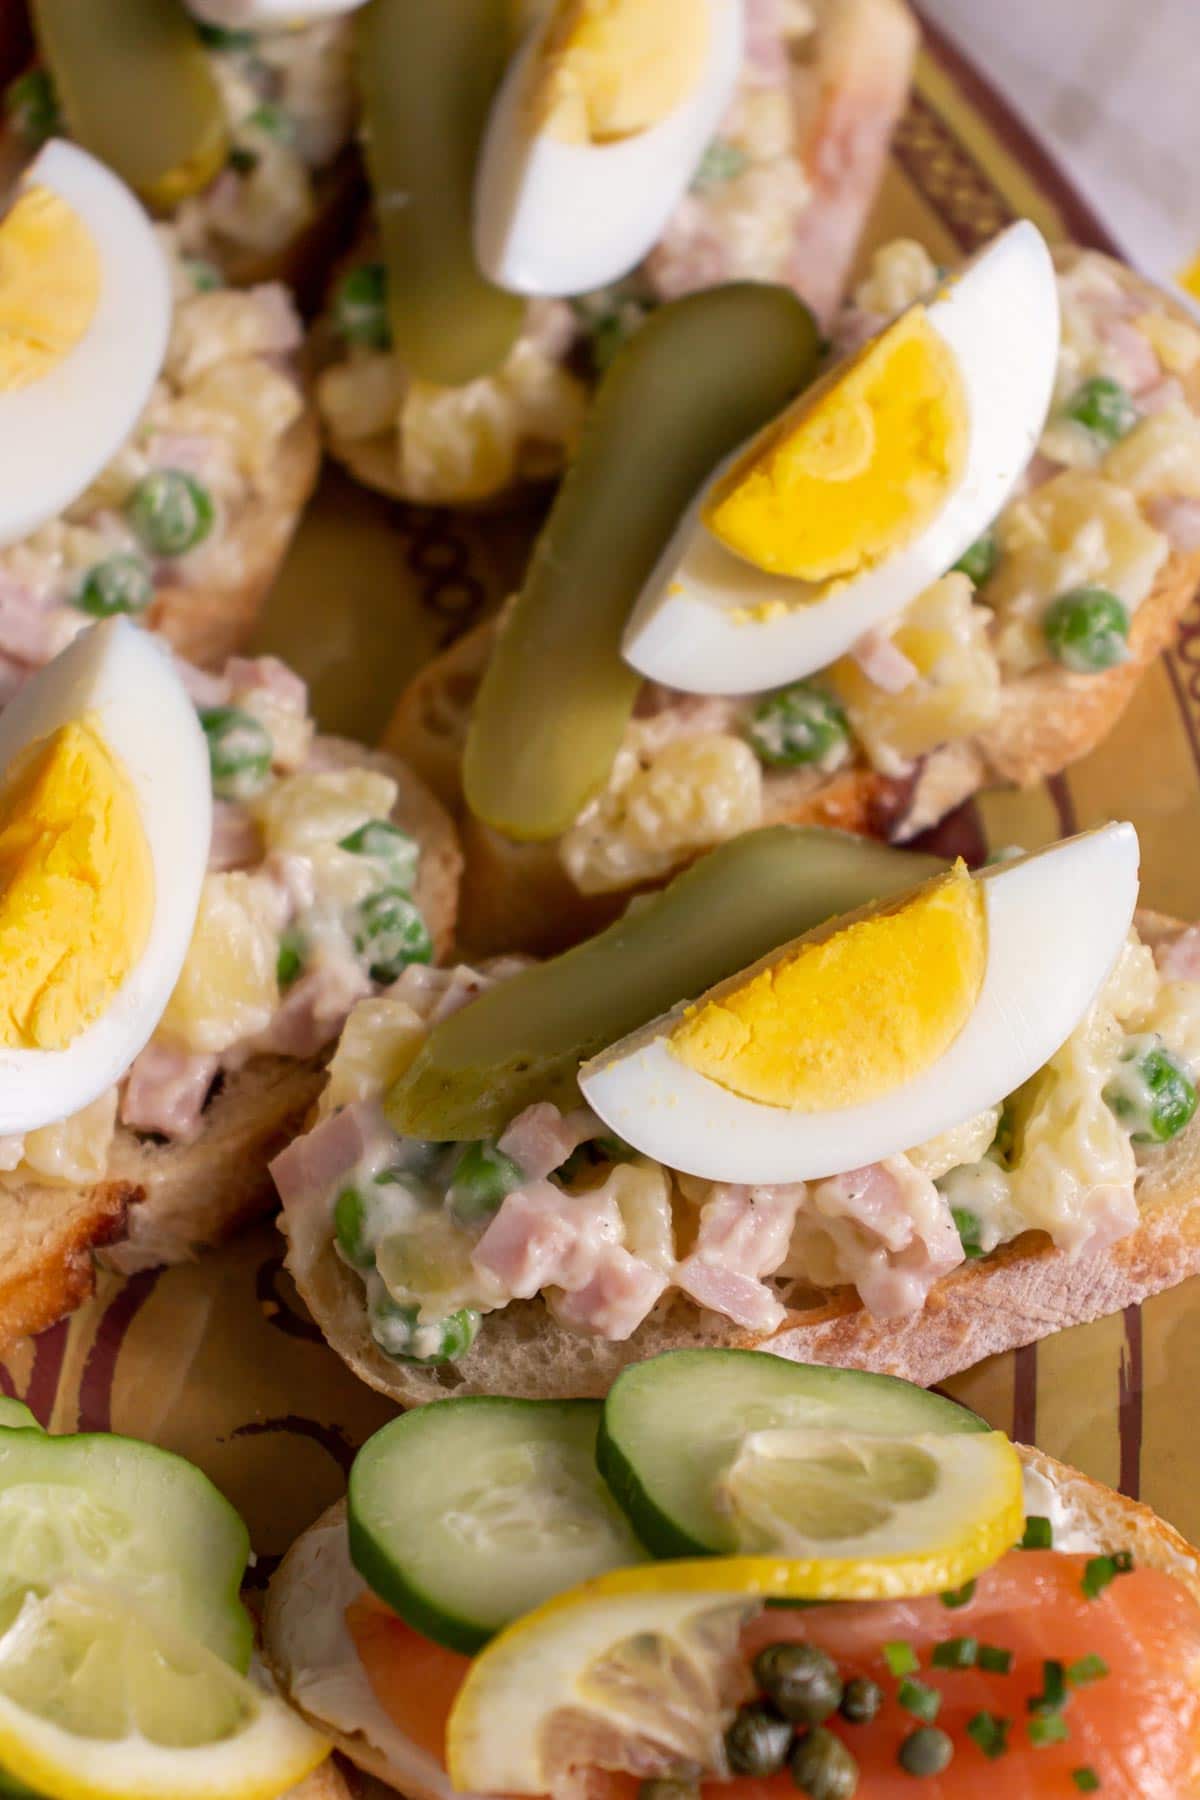 Closeup of open-faced sandwiches topped with potato and ham salad, sliced pickle and boiled egg.